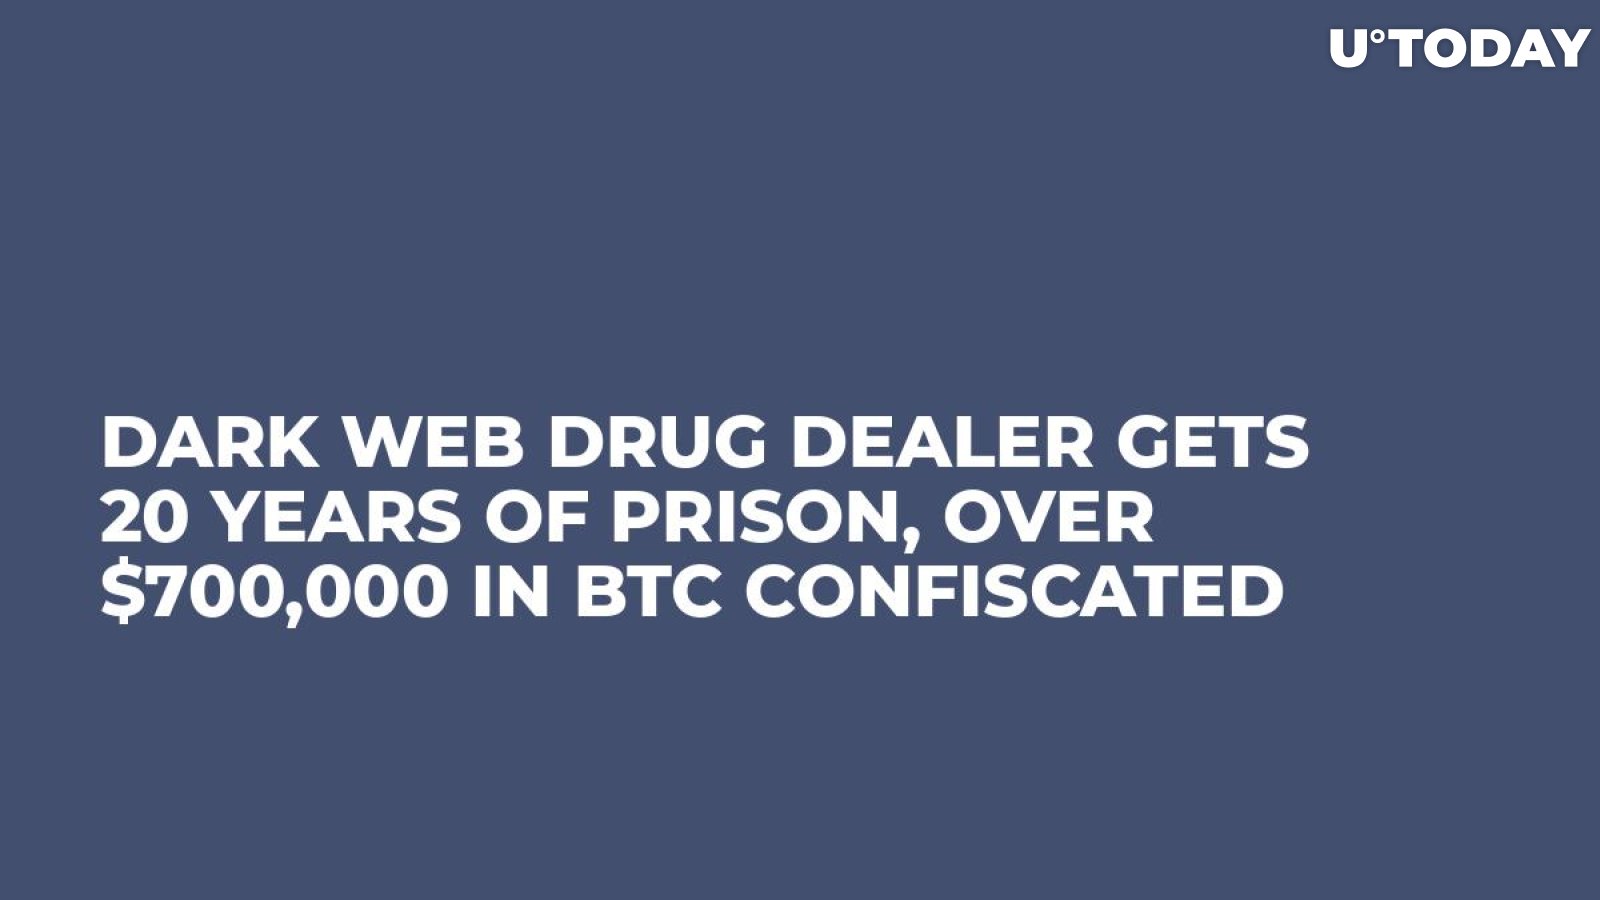 Dark Web Drug Dealer Gets 20 Years of Prison, Over $700,000 in BTC Confiscated